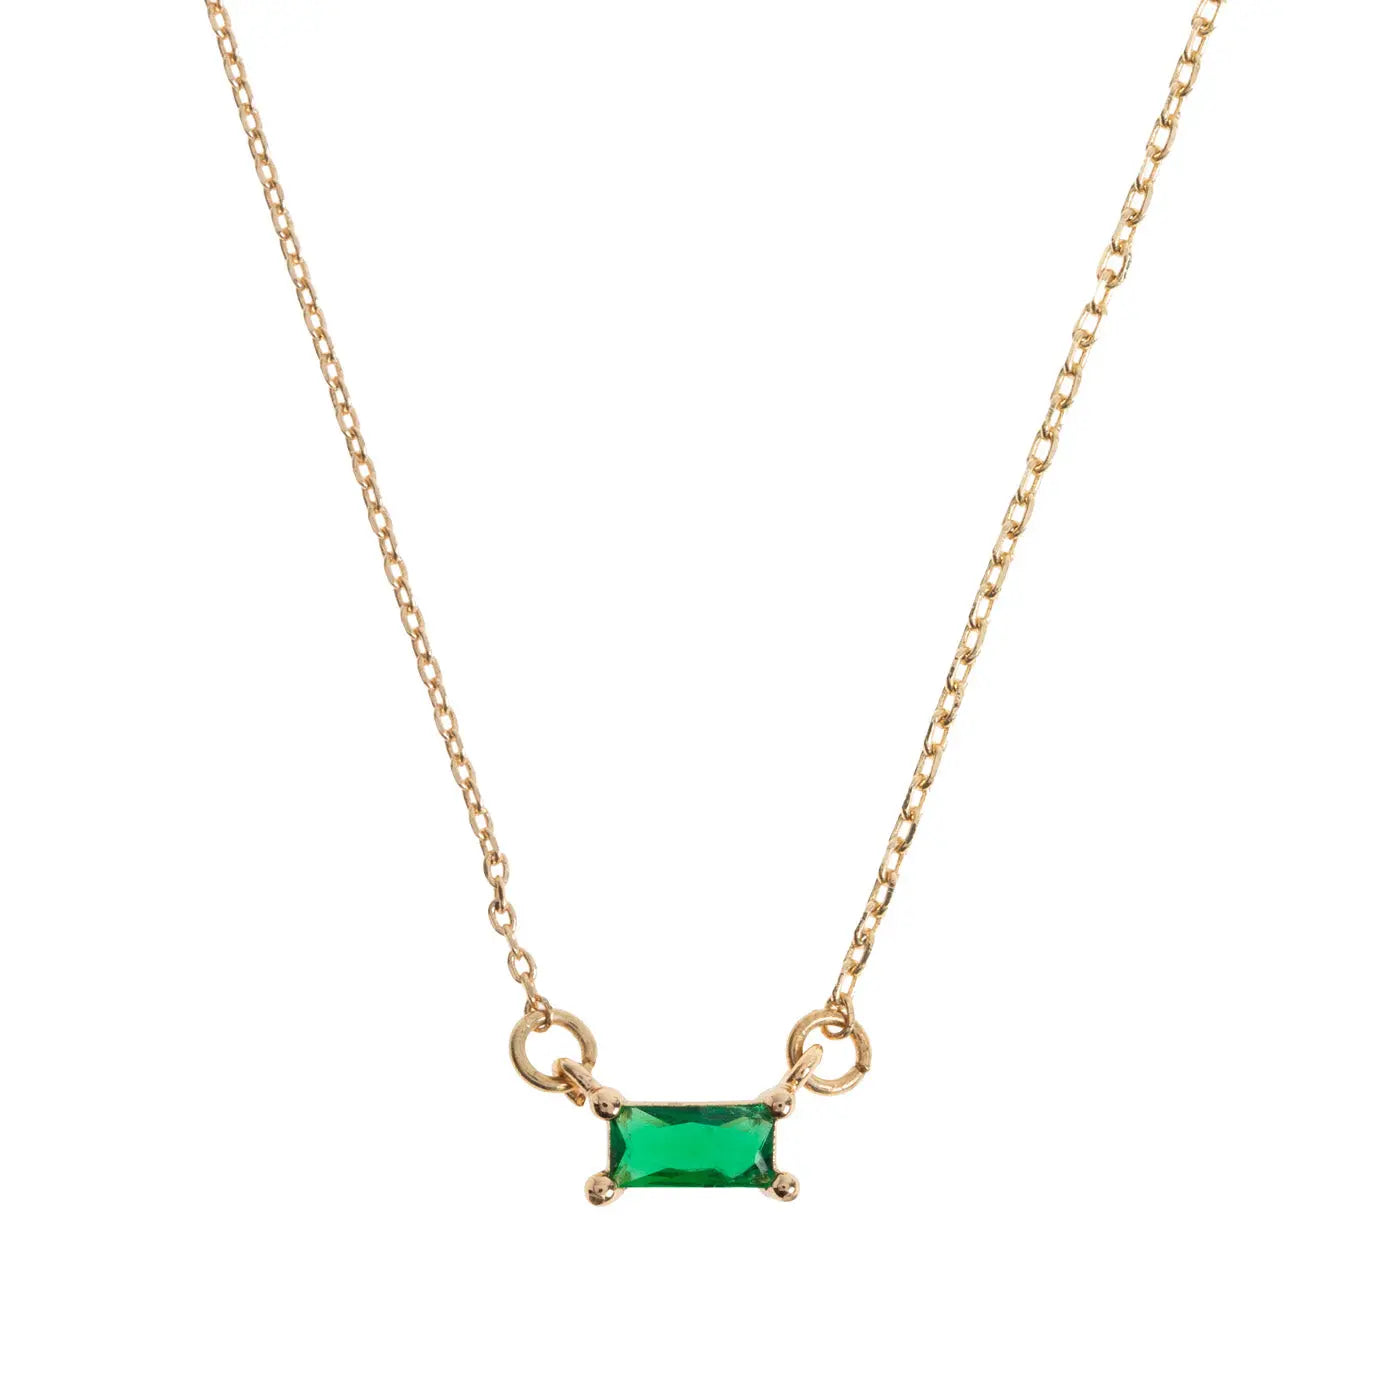 Necklace with Rectangular Crystal - Green